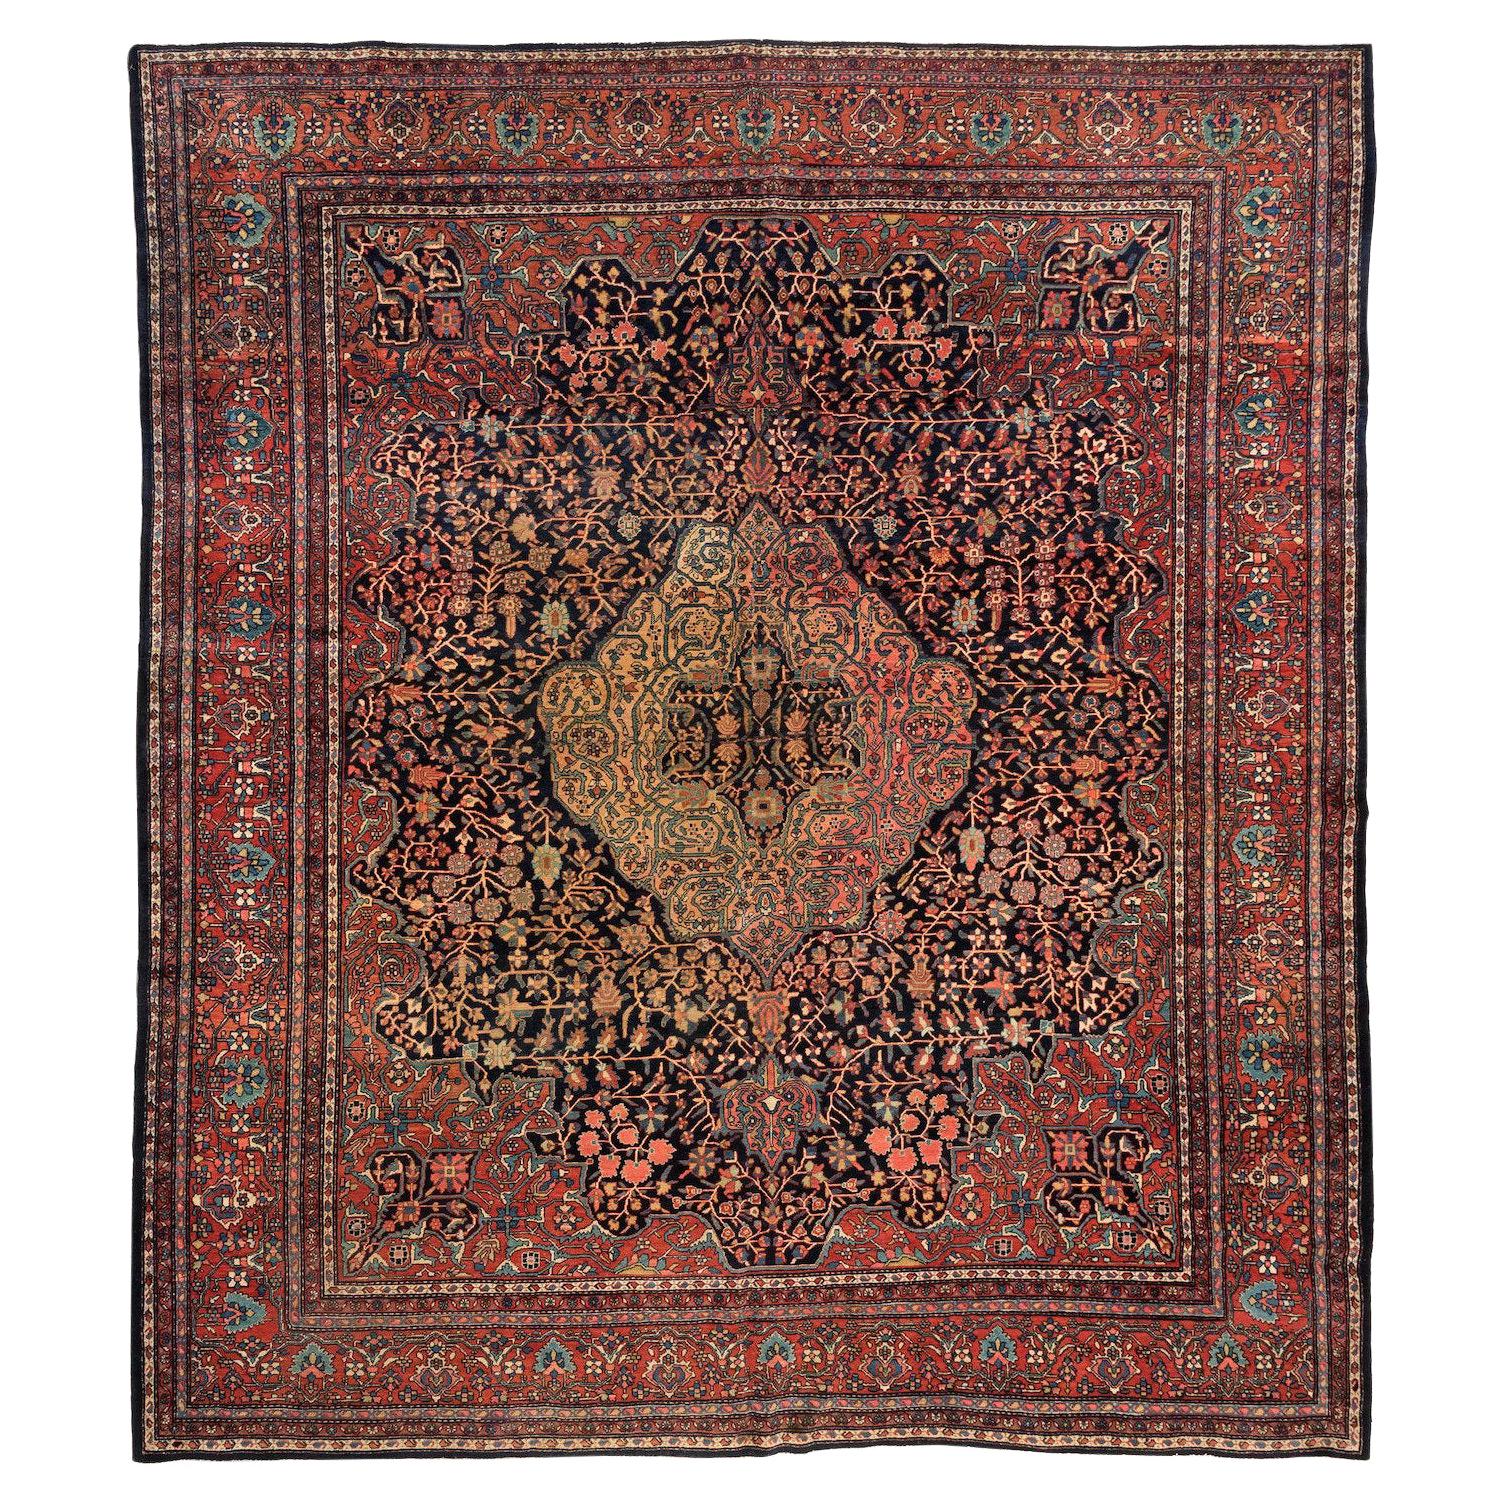 Antique Square Persian Red Navy Blue Farahan Sarouk Room Size Area Rug c. 1900s For Sale